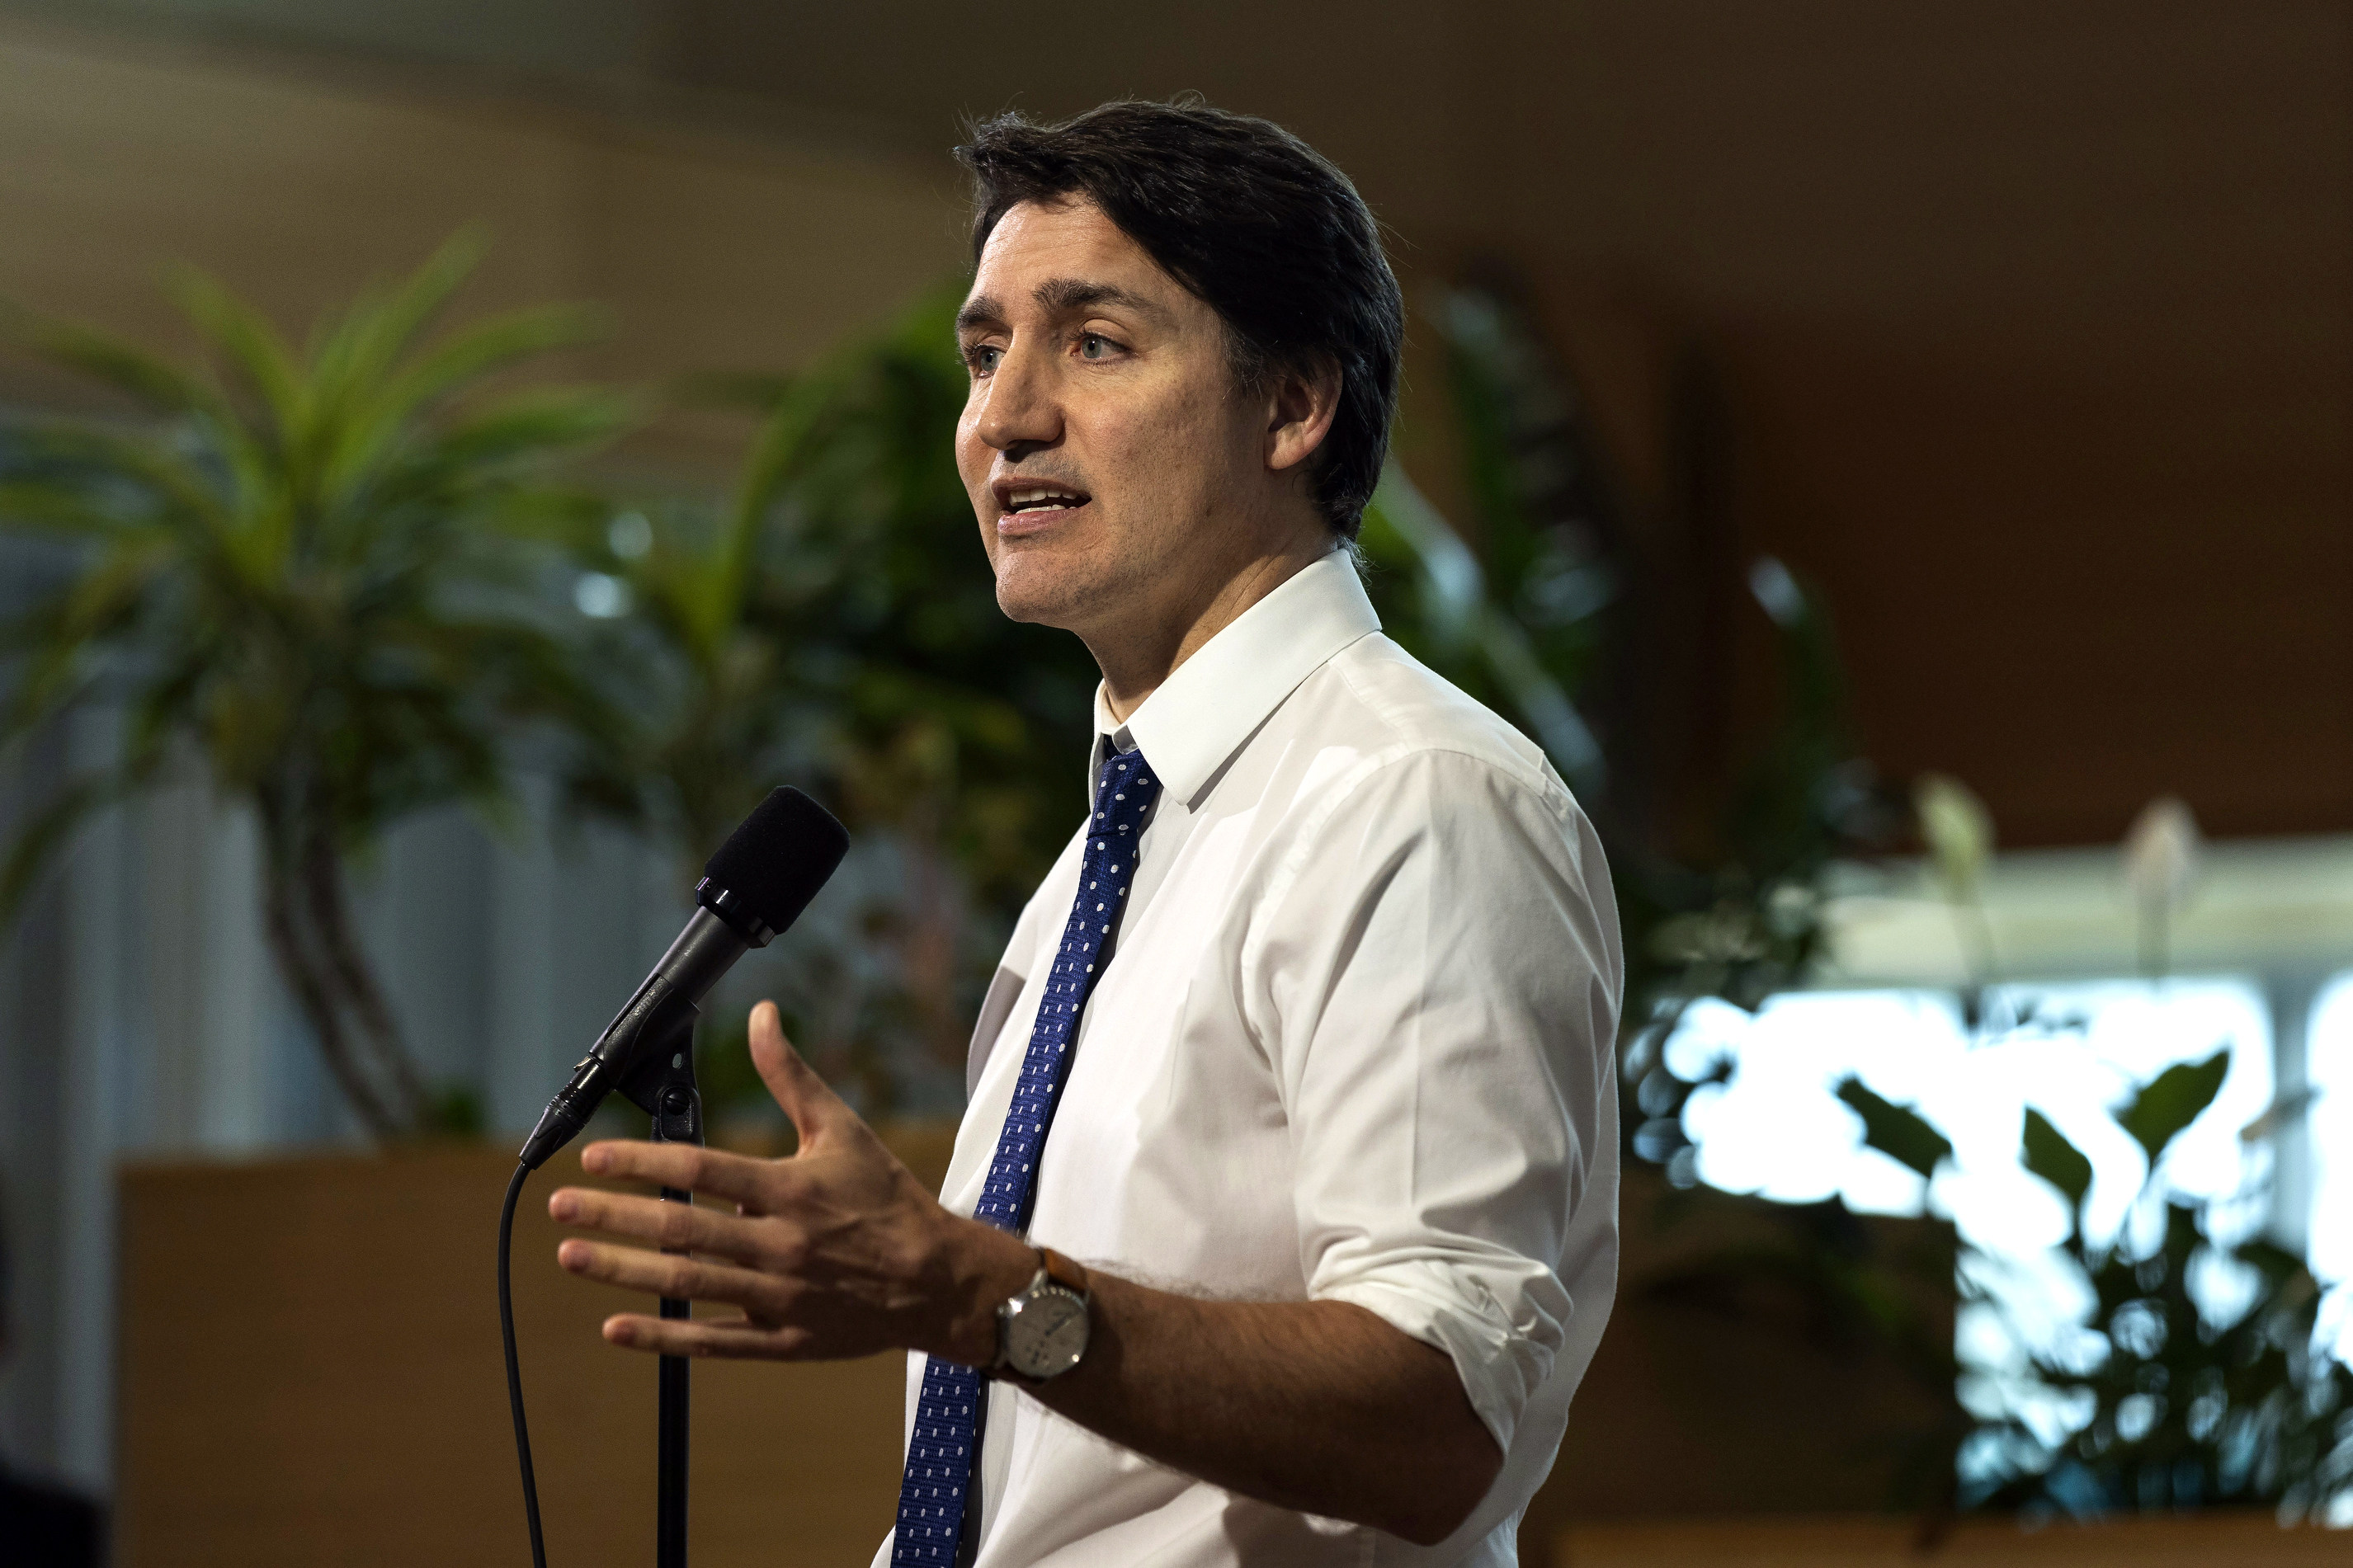 Canada’s Prime Minister Justin Trudeau in Hamilton, Ontario on Friday. Photo: The Canadian Press via AP